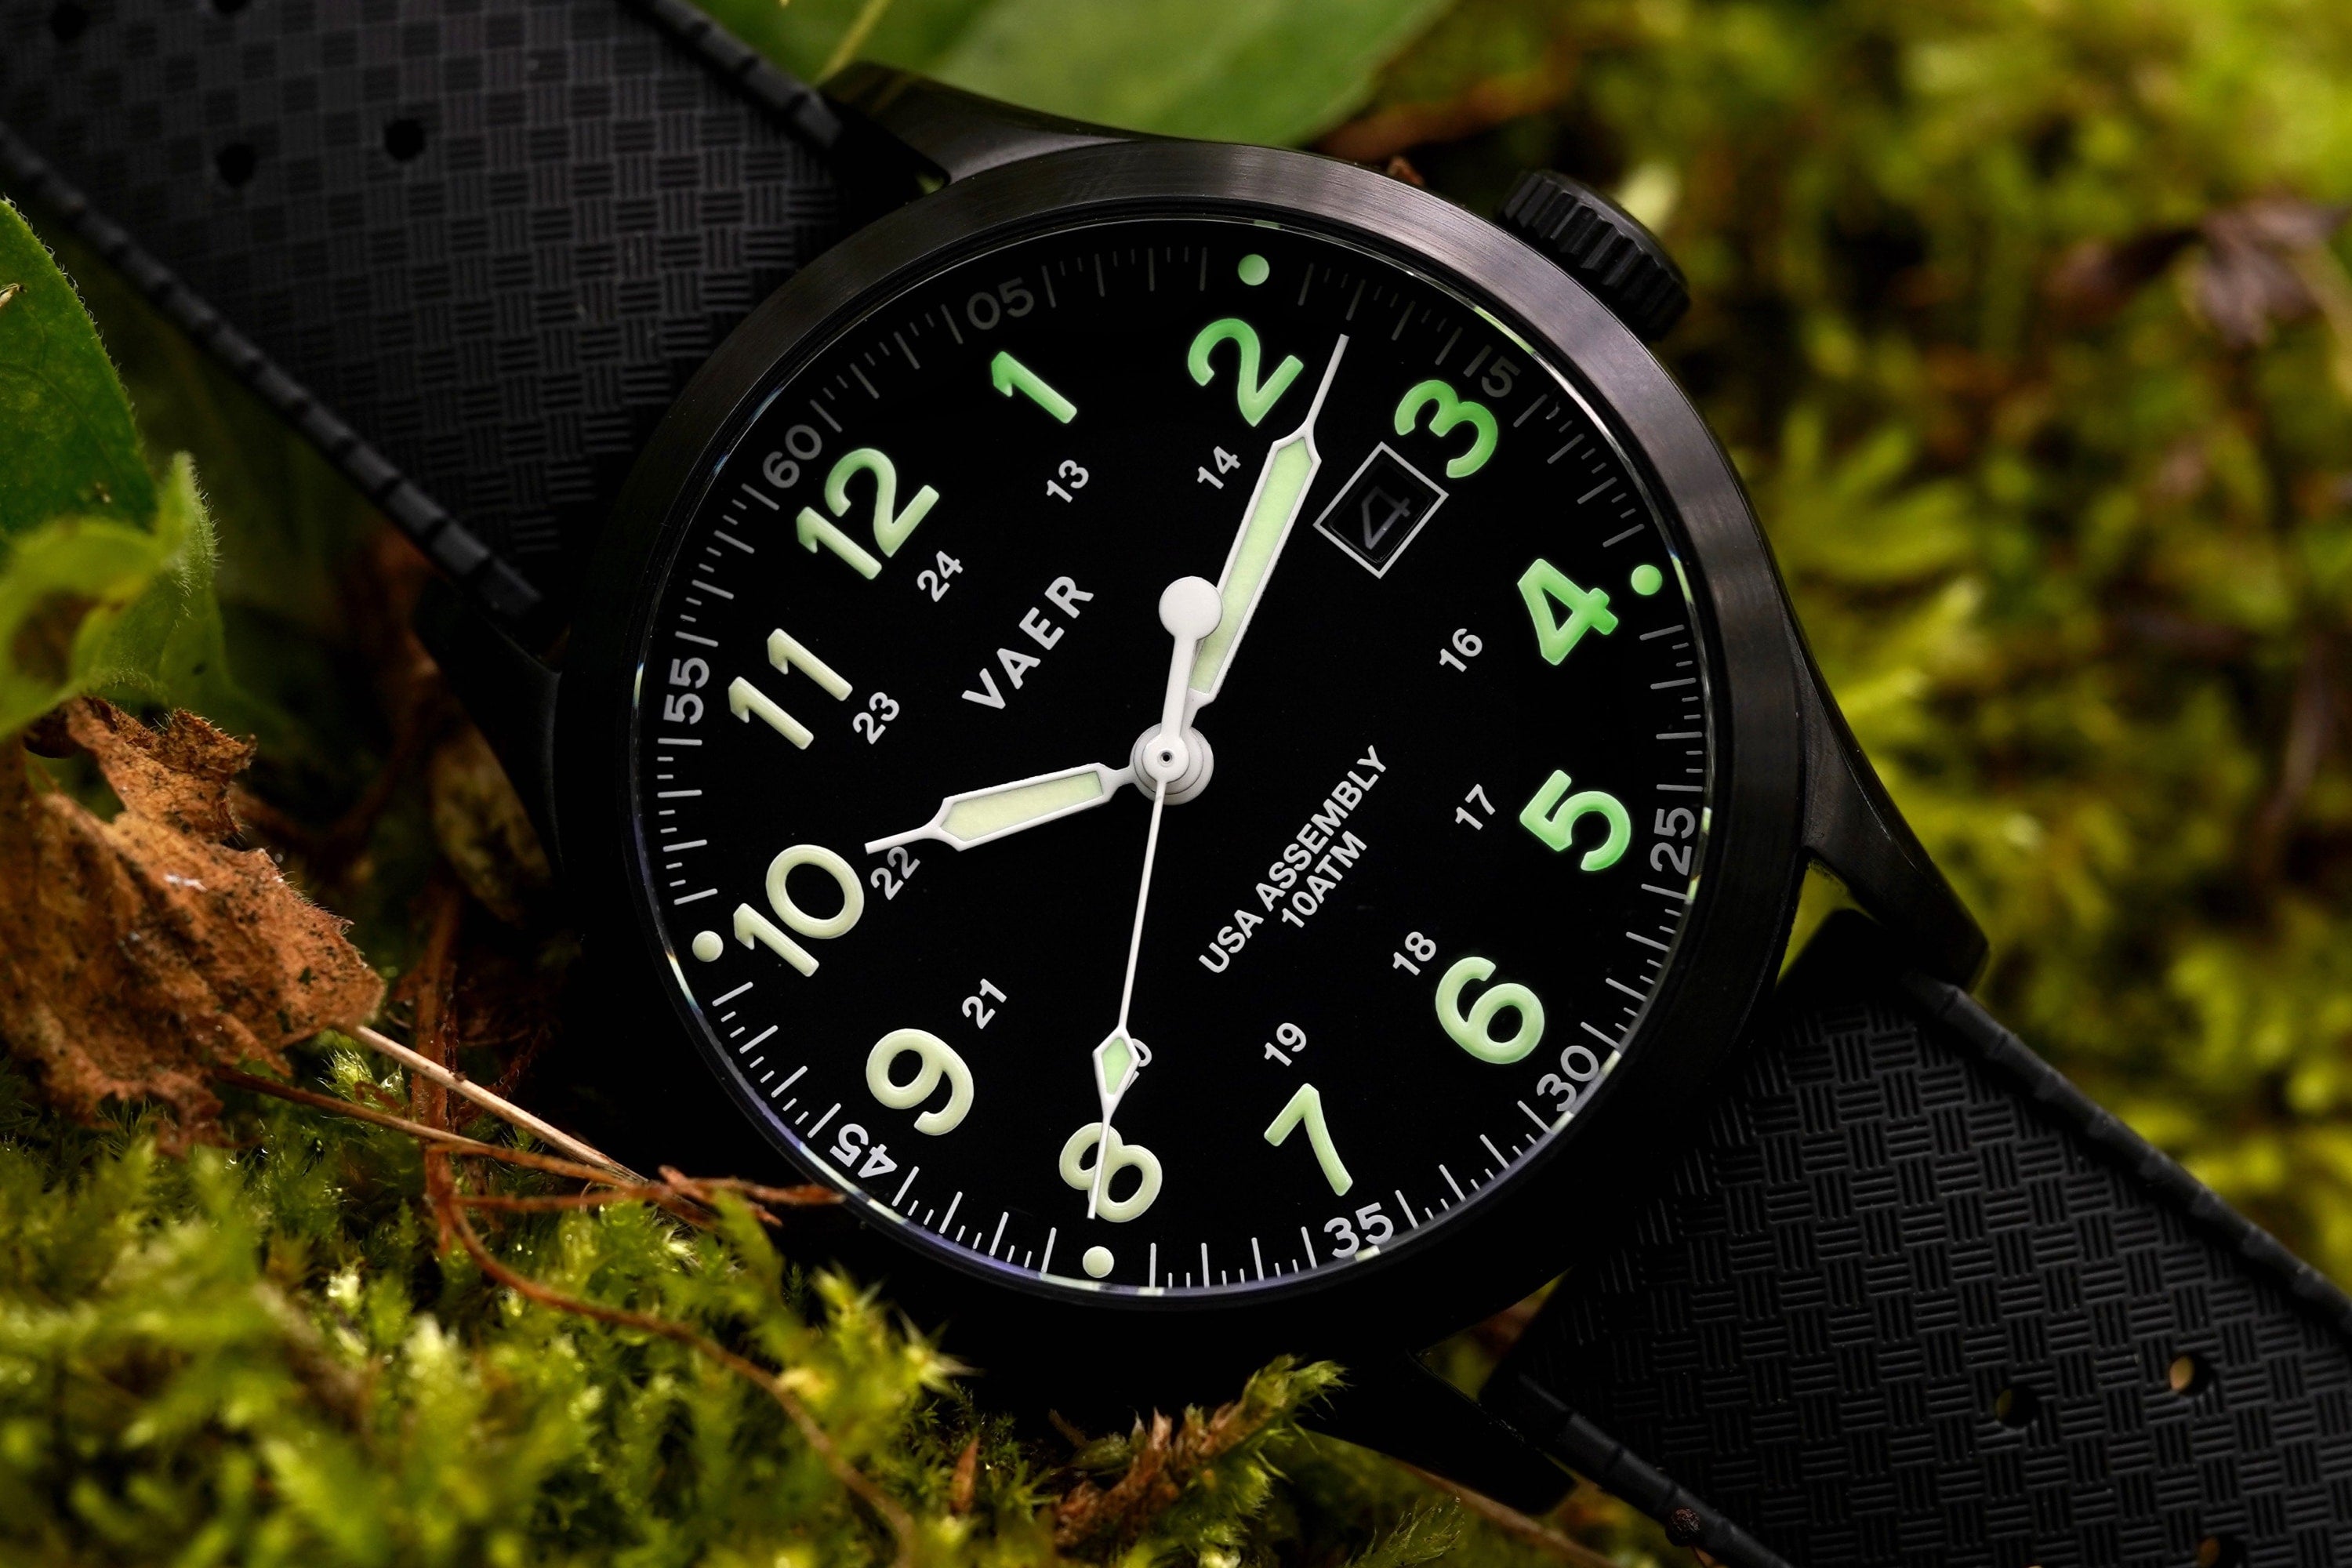 Why does Lume Paint matter in watches?